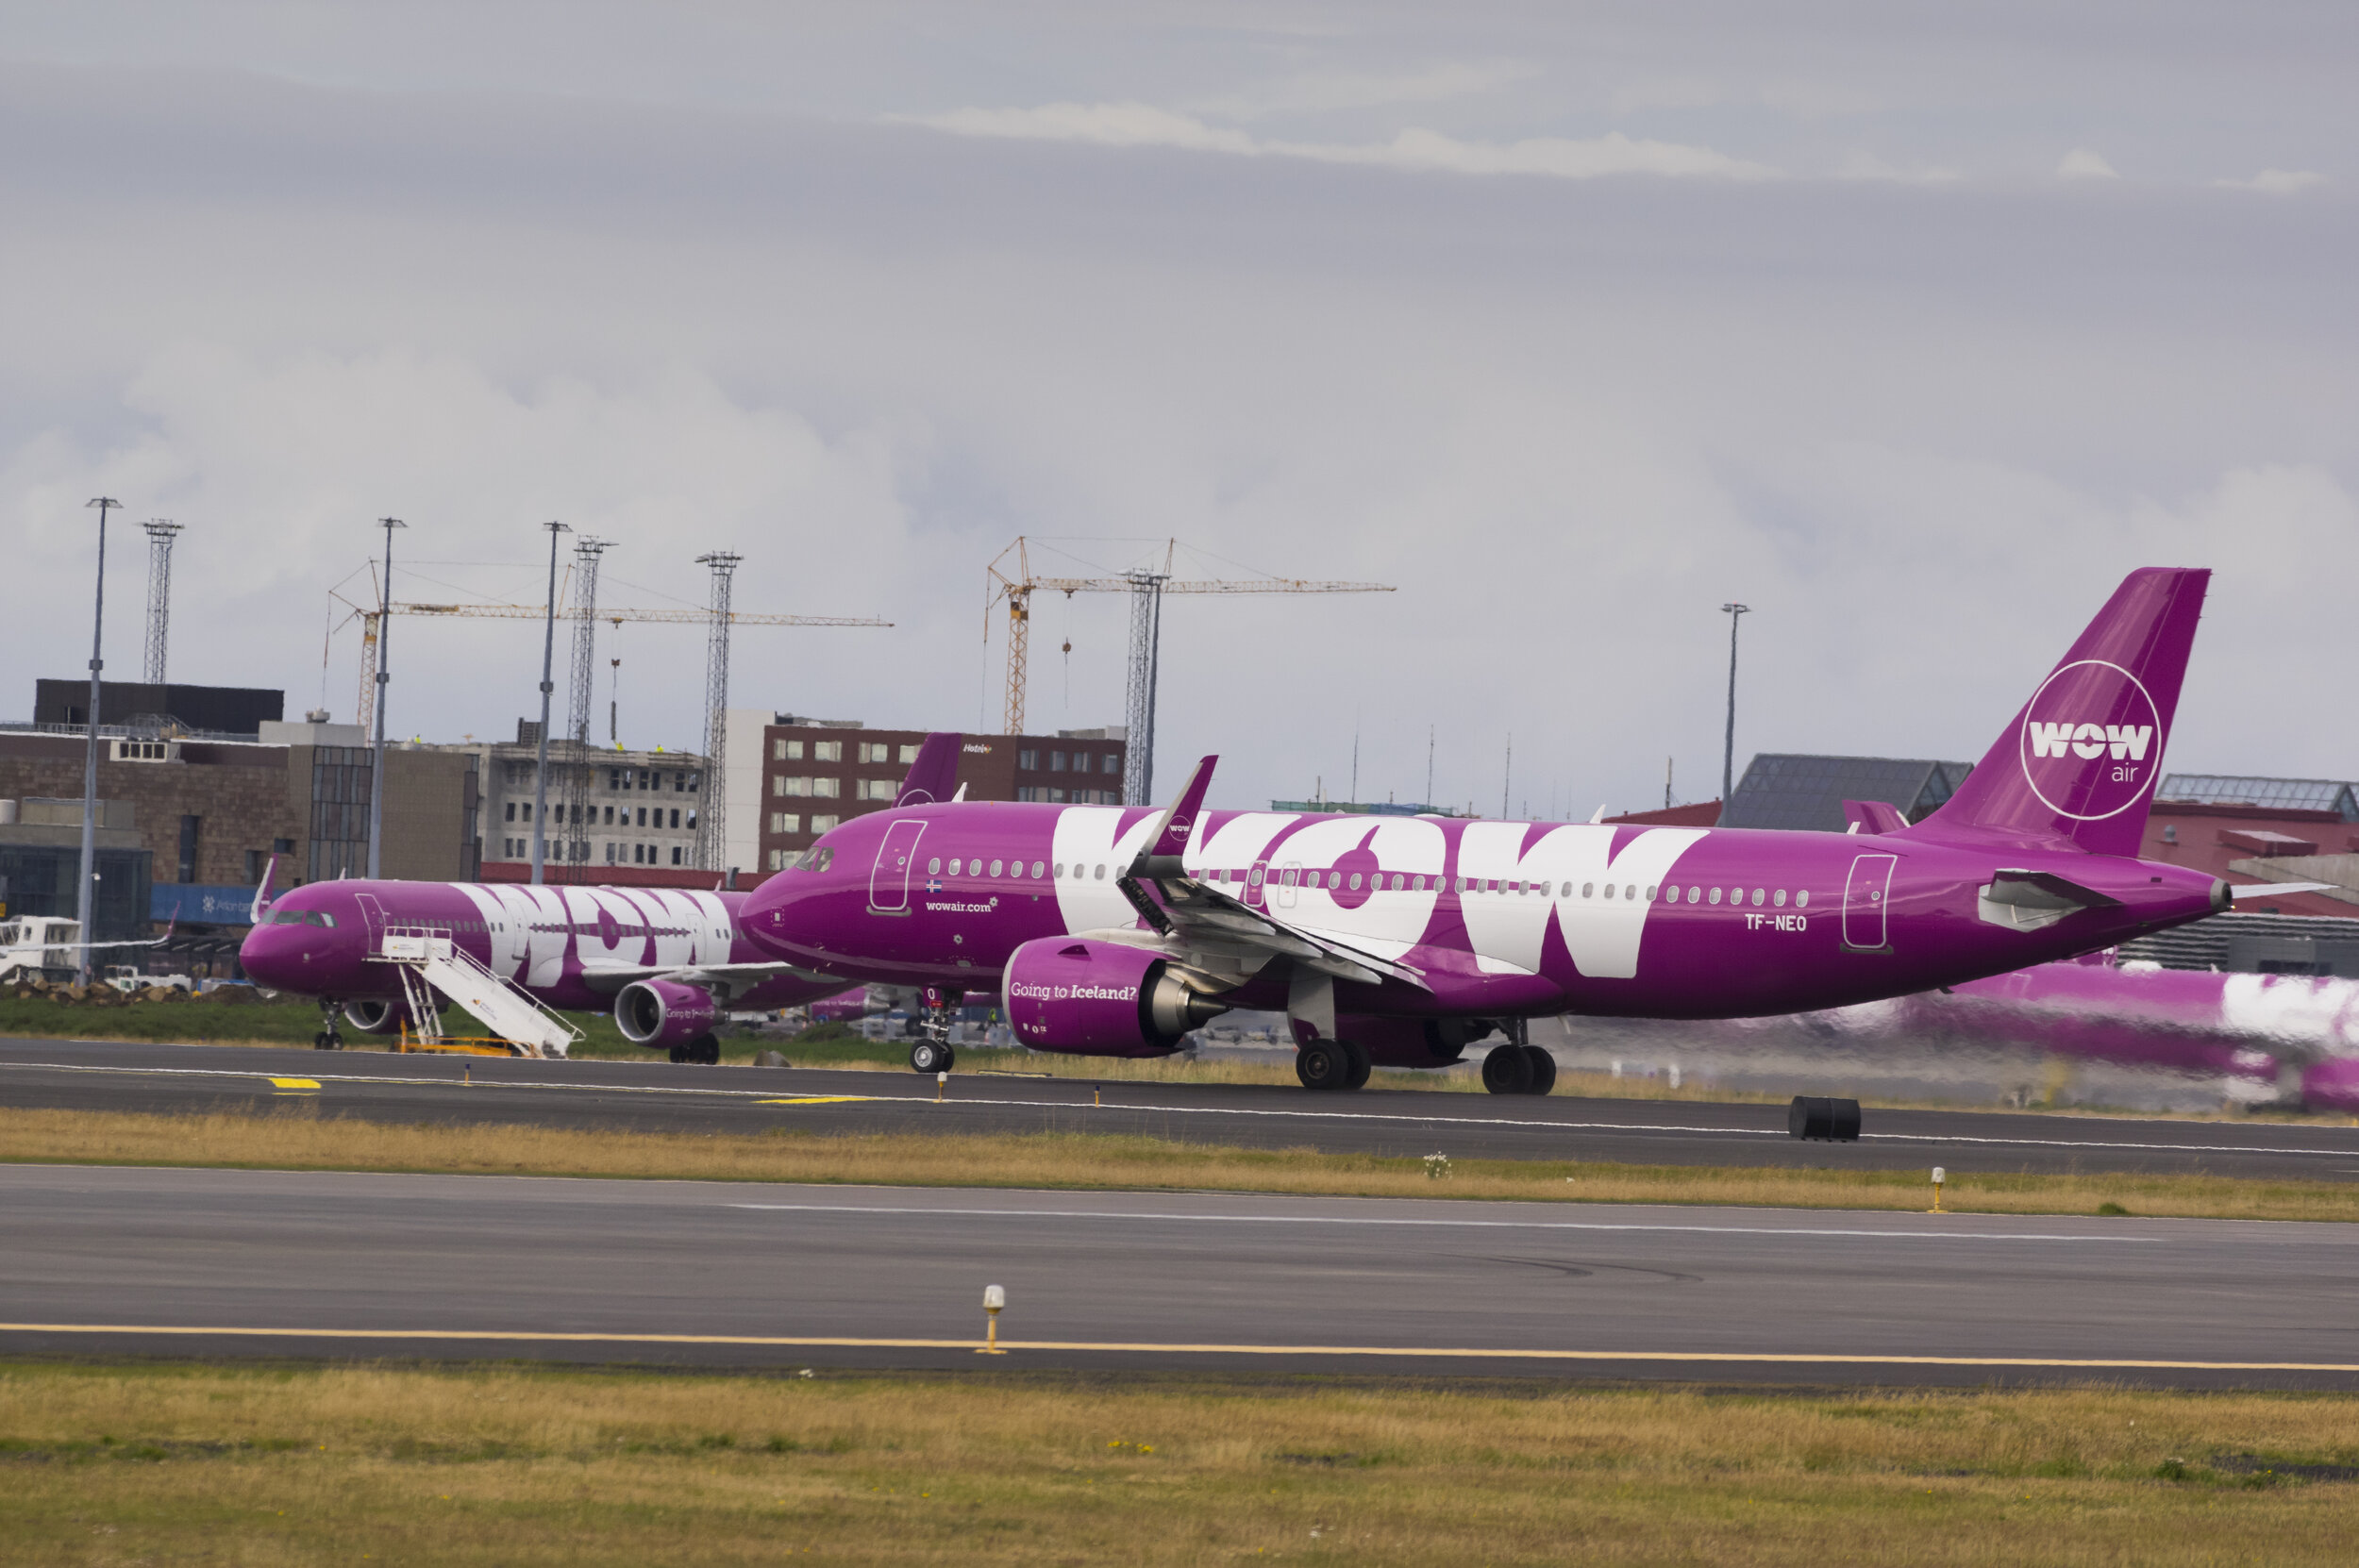 WAB air to Rise from the Ruins of WOW Air